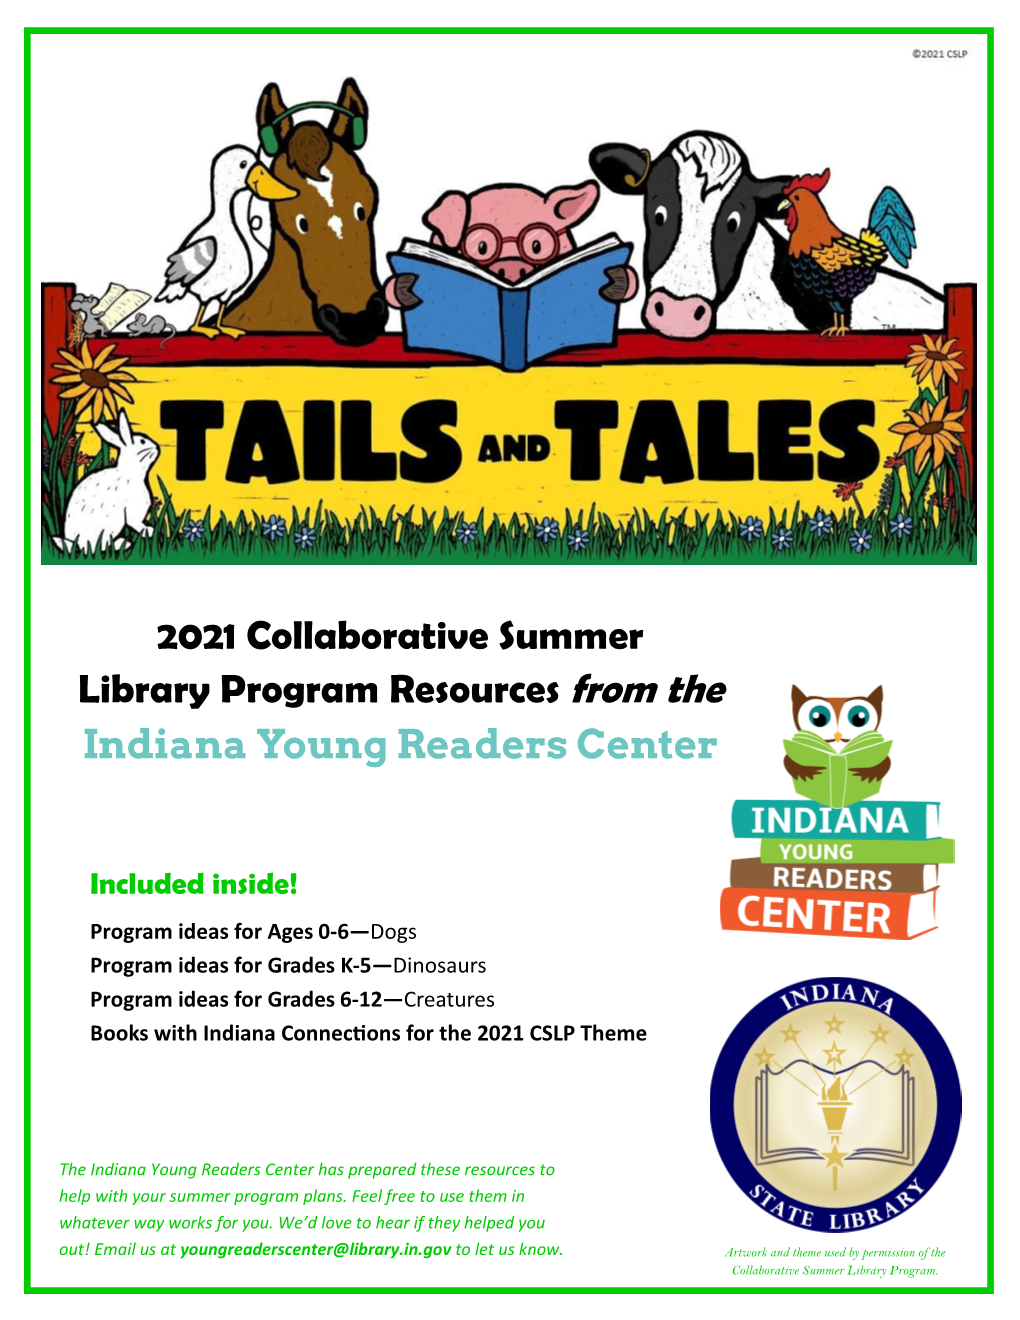 2021 Collaborative Summer Library Program Resources from the Indiana Young Readers Center